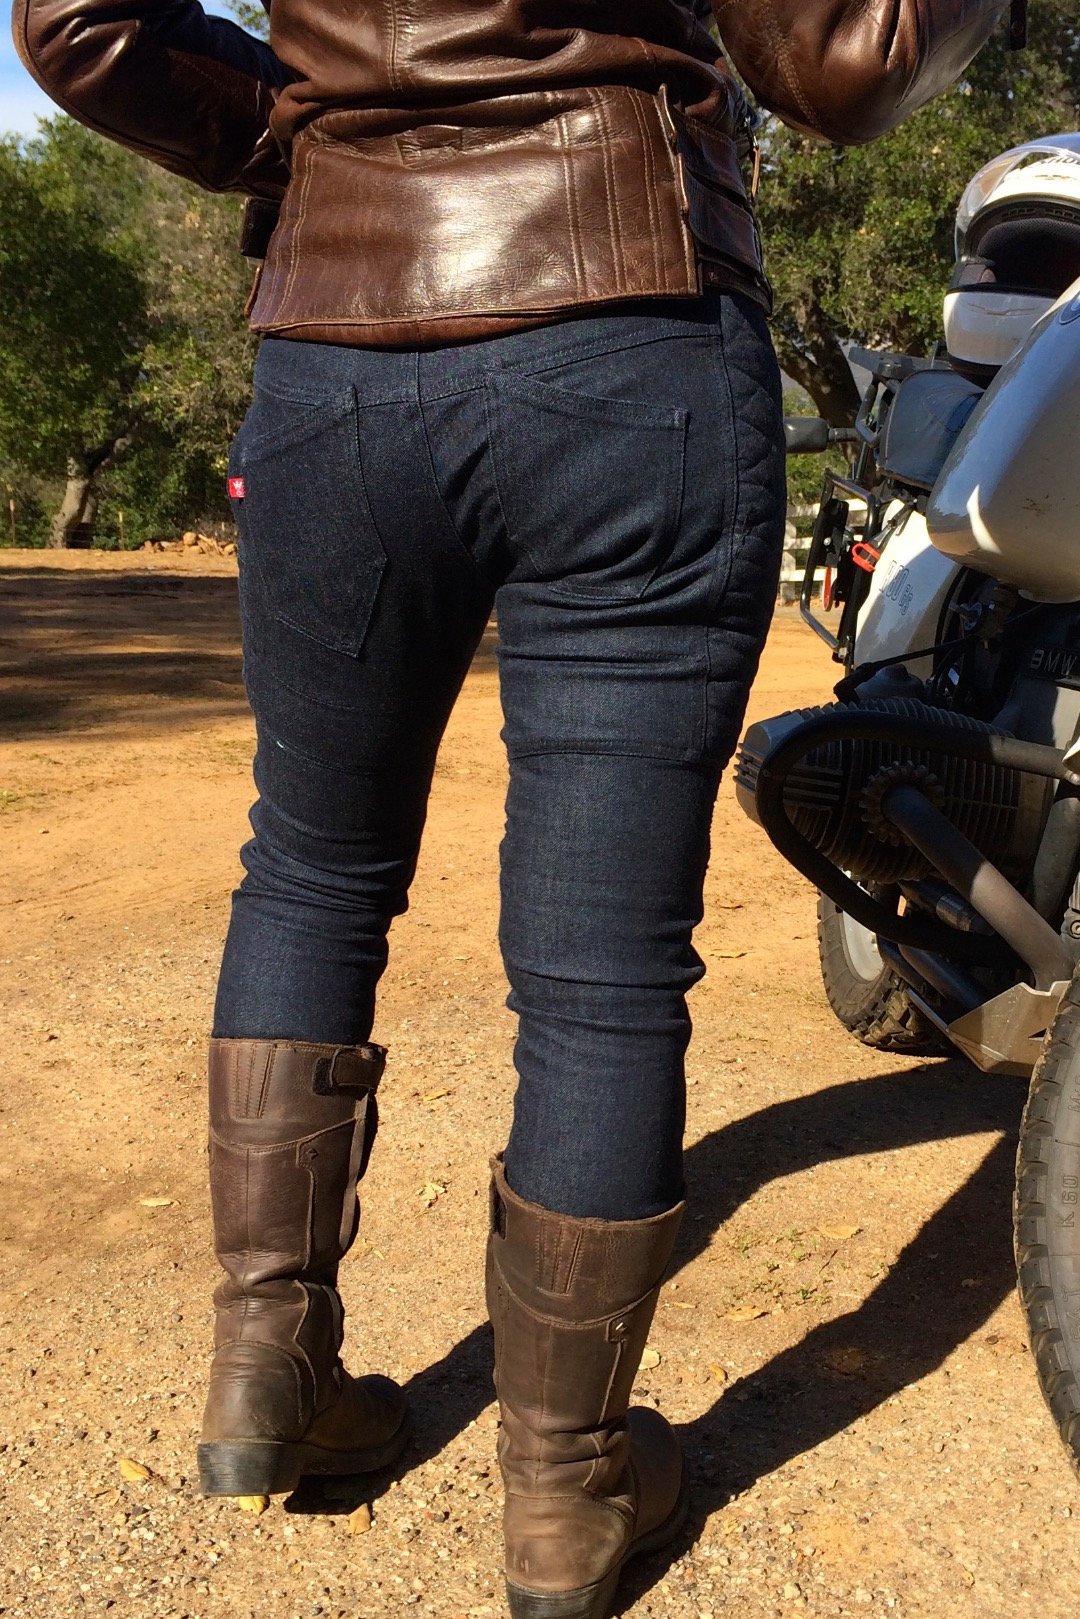 Pando-Moto-Rosie-womens-motorcycle-jeans-review-3 - GLORIOUS